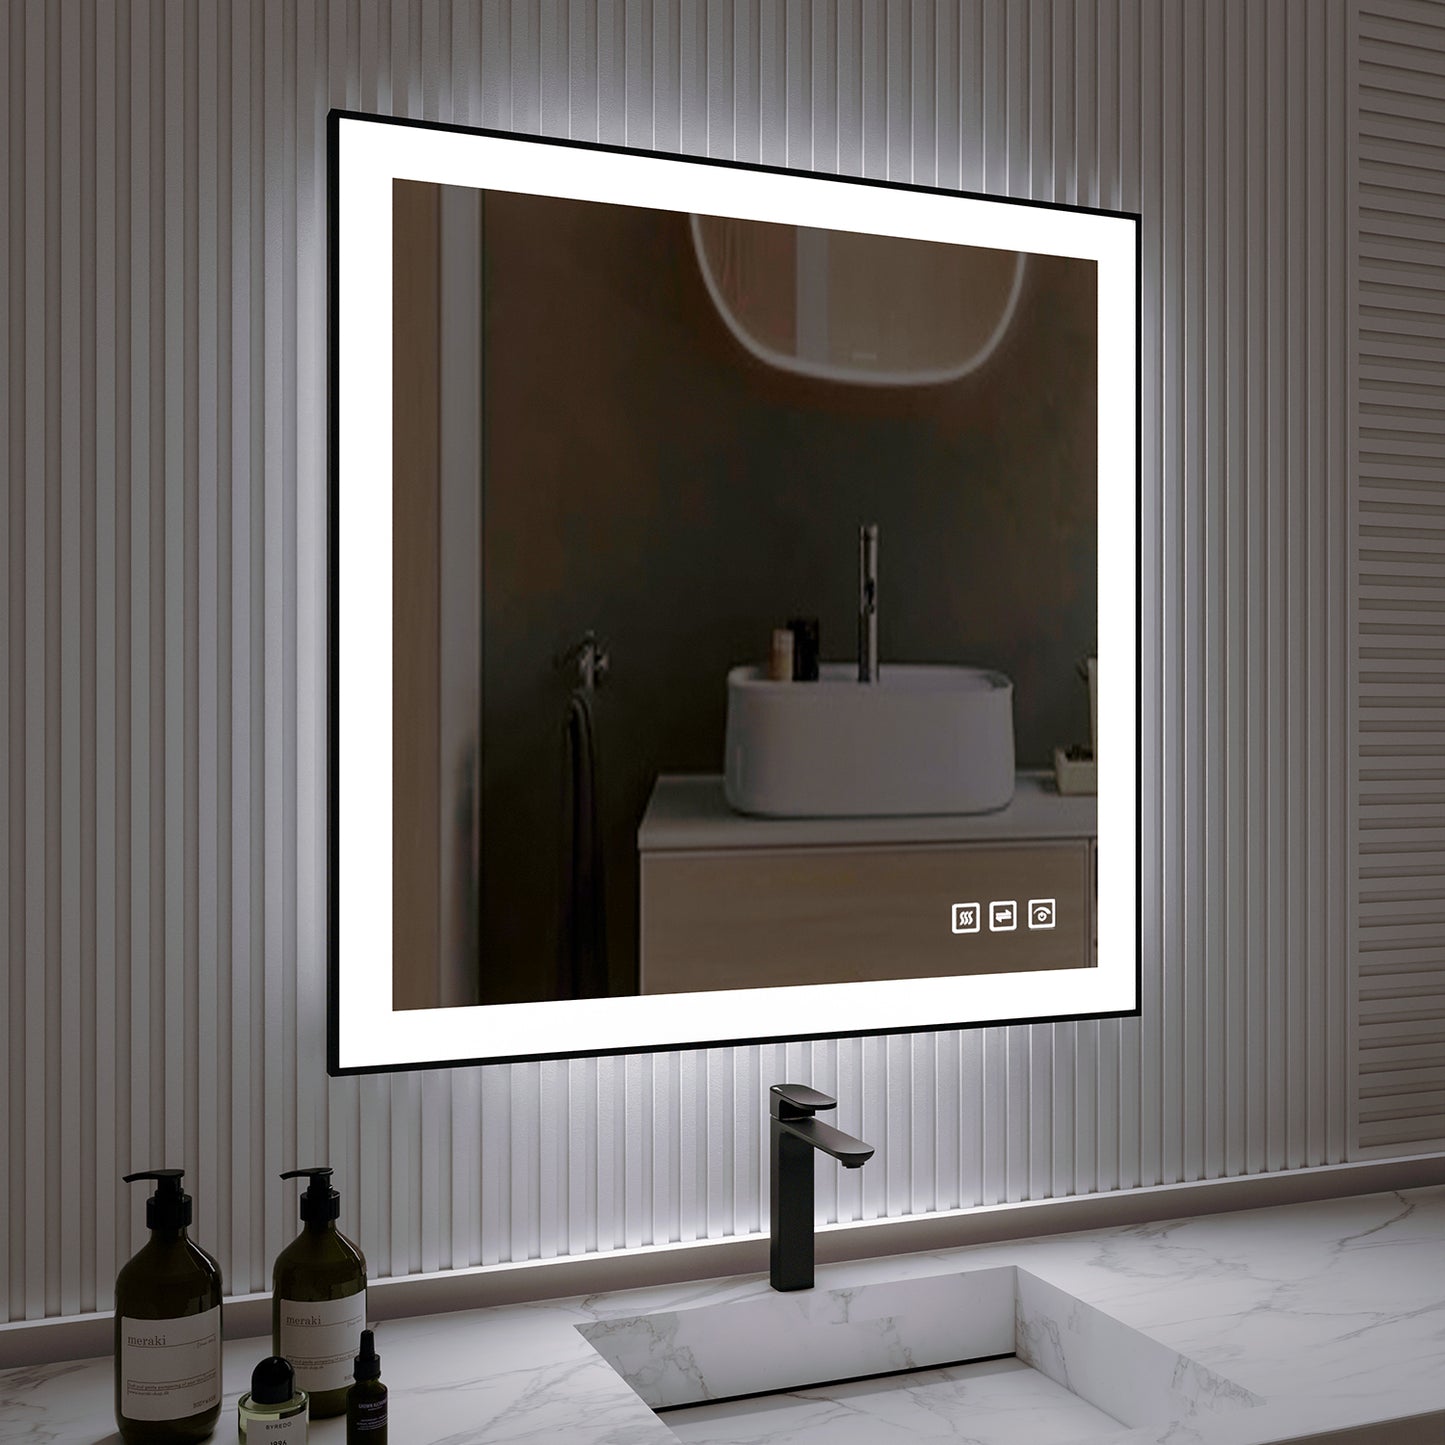 Waterpar® 36 in. W x 36 in. H Rectangular Framed Anti-Fog LED Wall Bathroom Vanity Mirror in Black with Backlit and Front Light